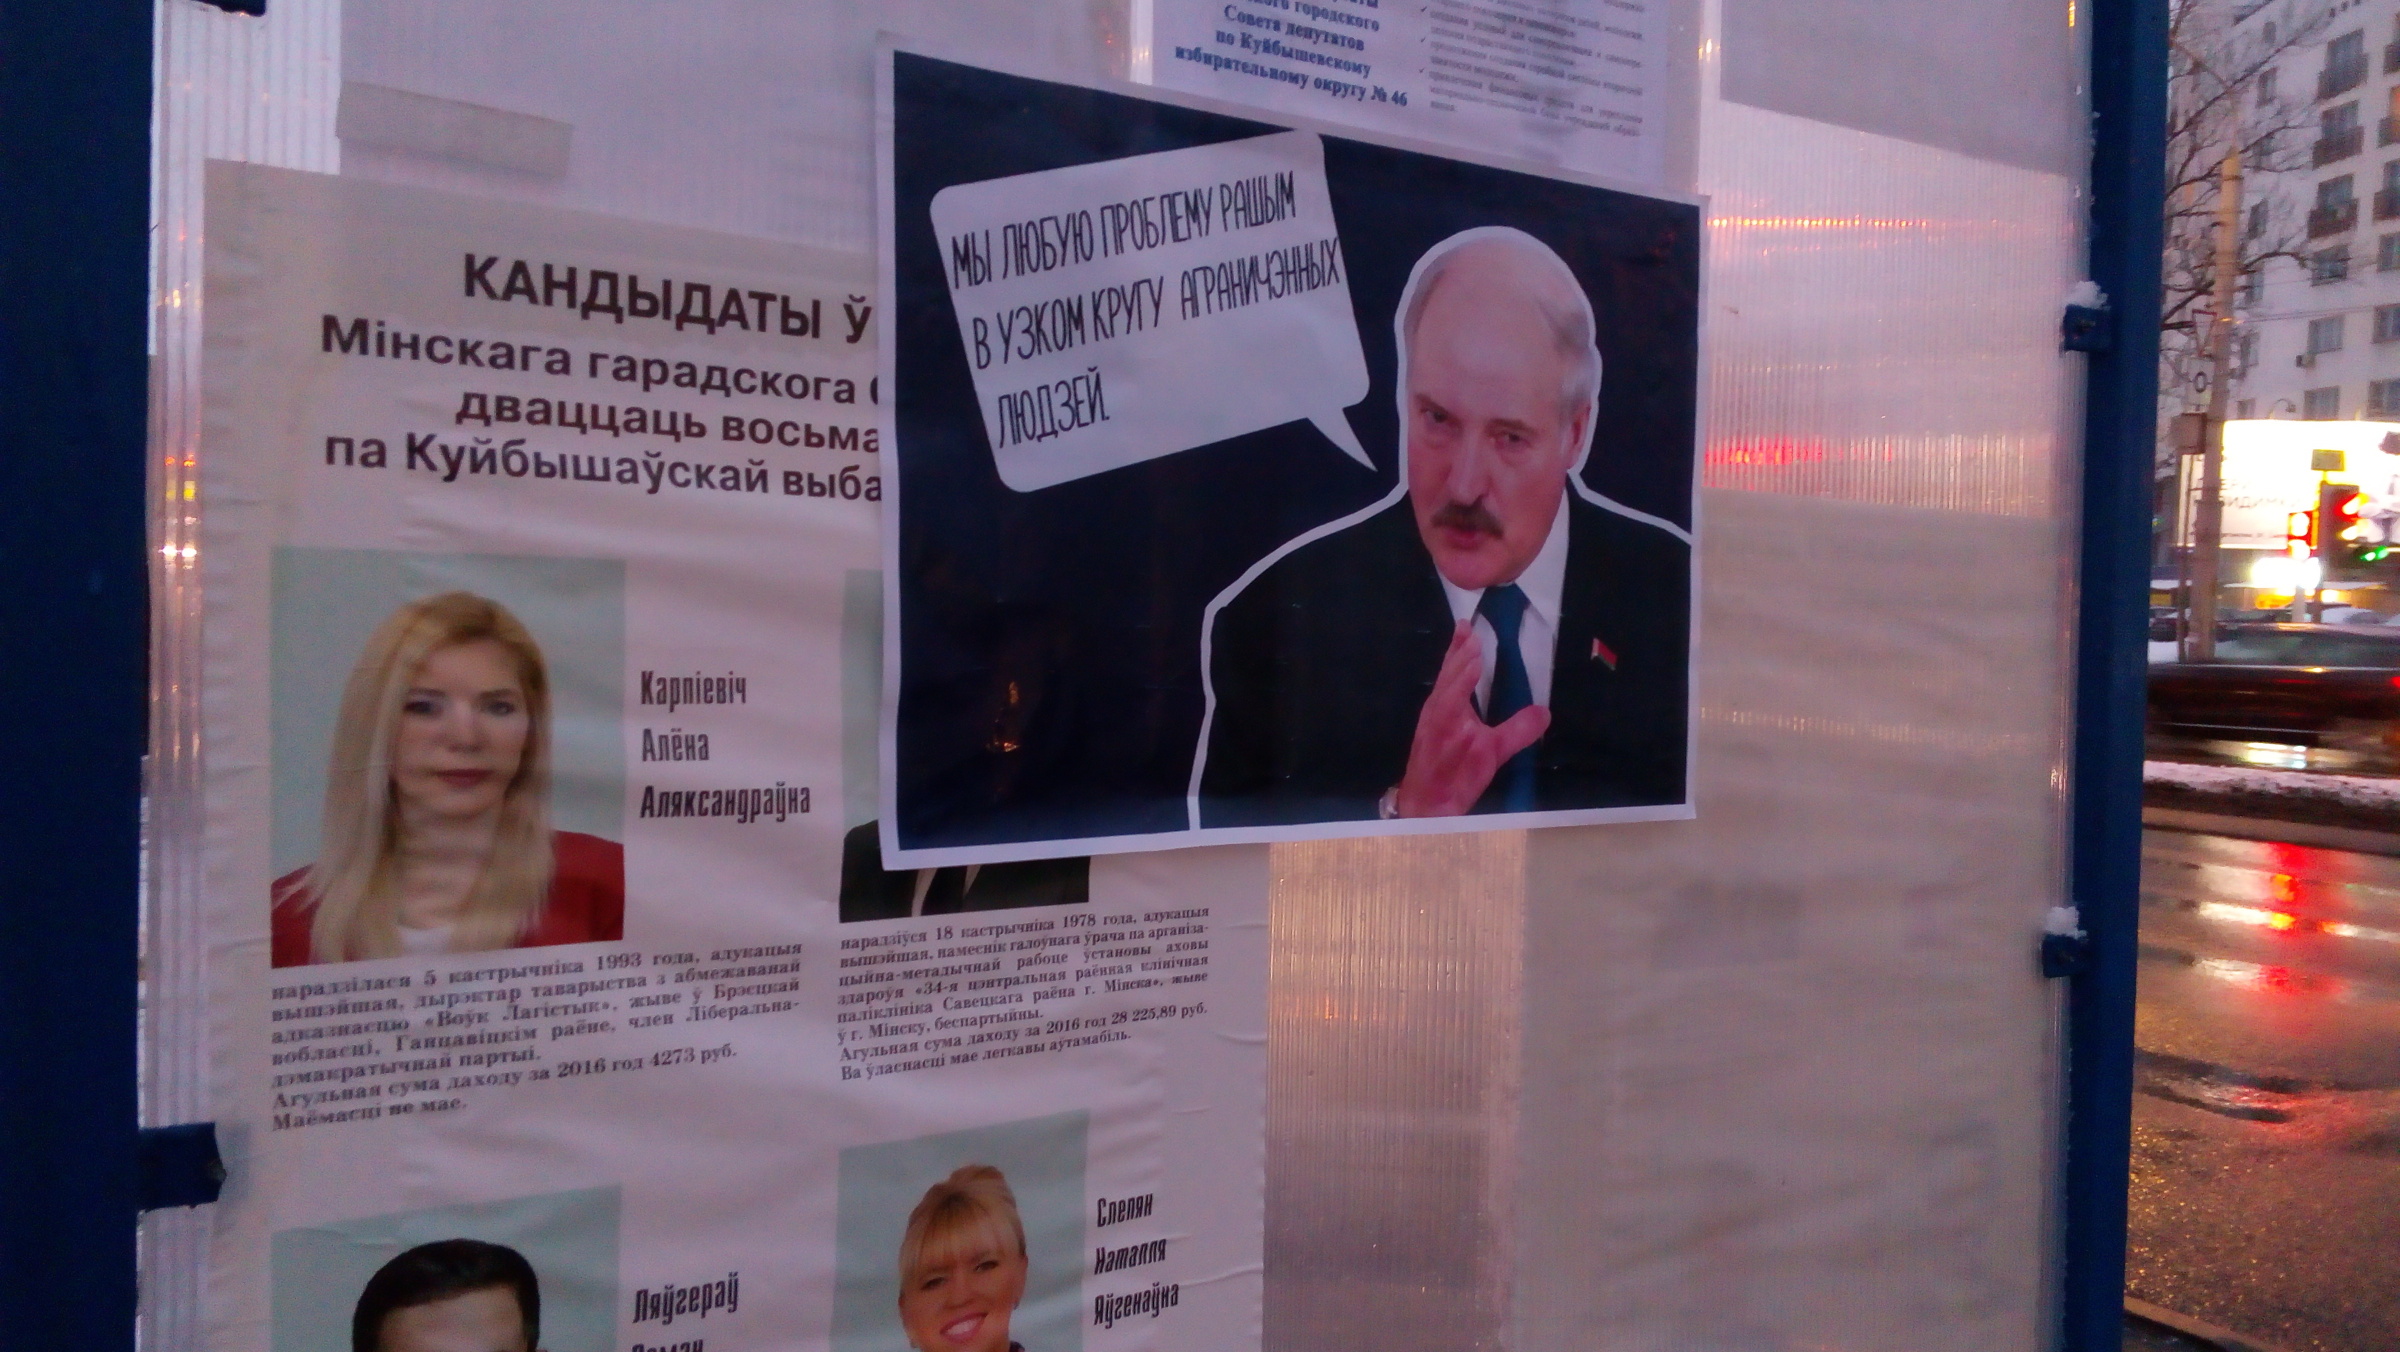 Anarchist posters in Minsk for the “elections”